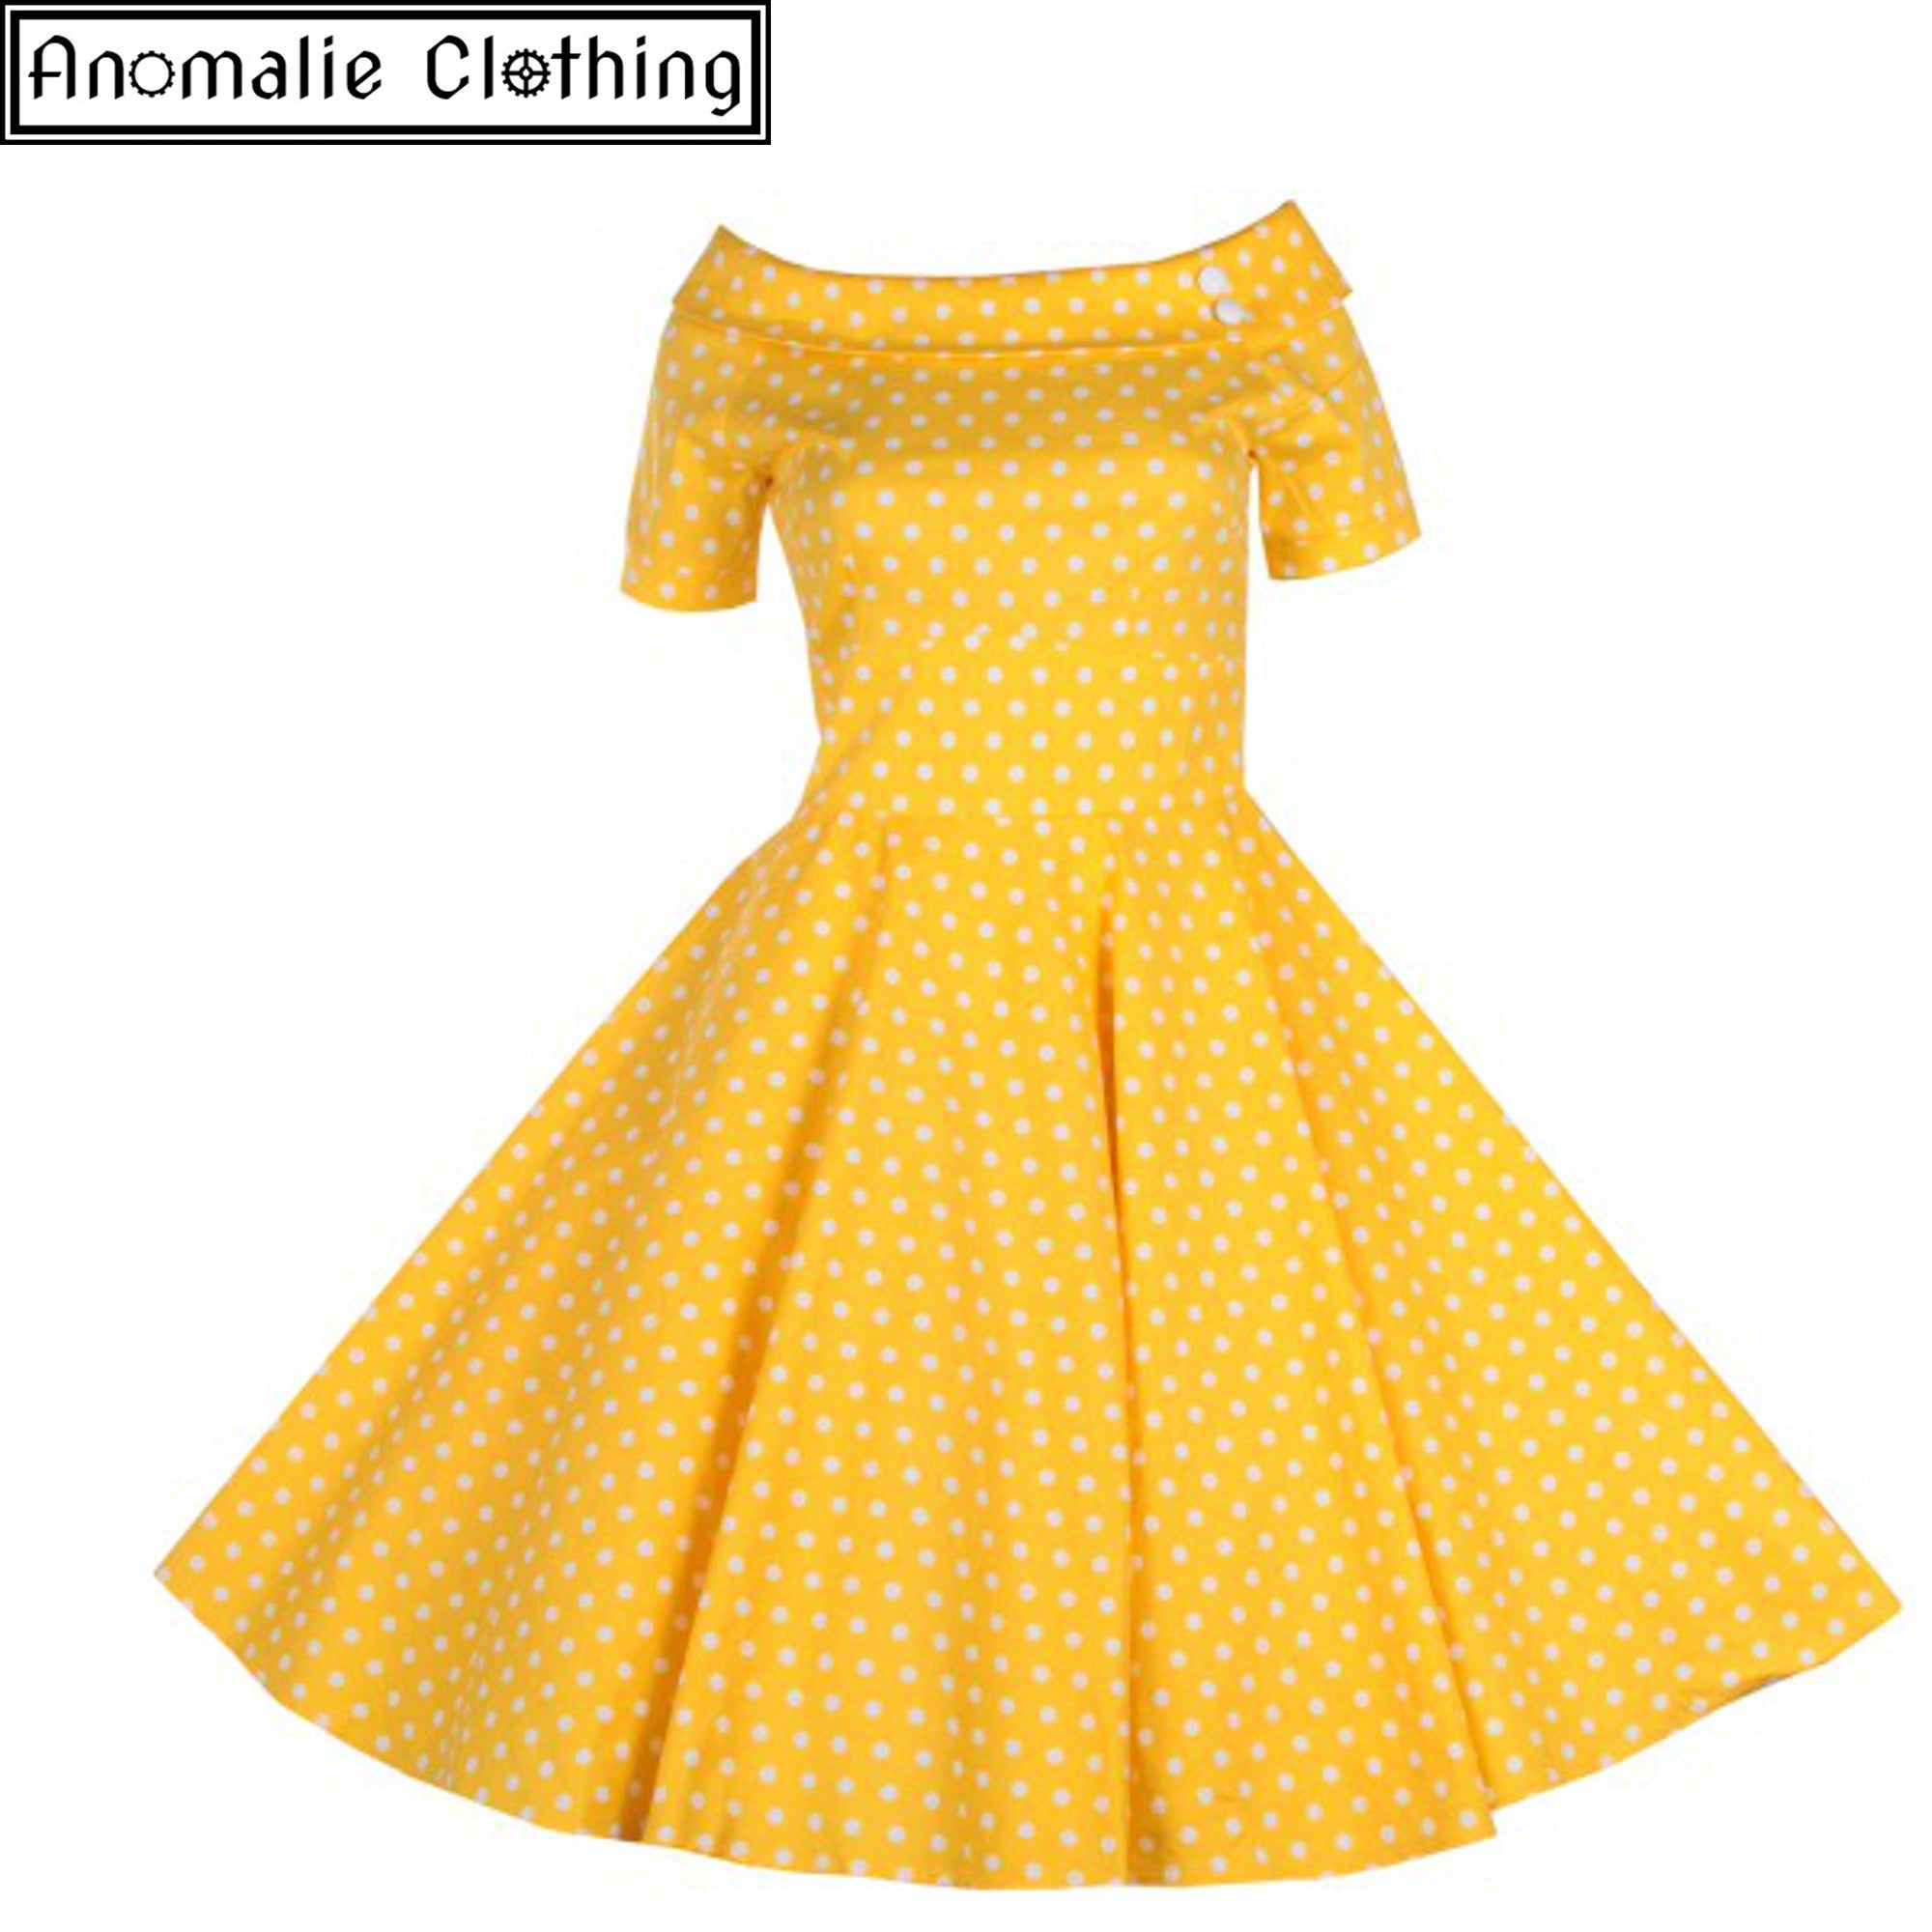 Dolly and Dotty Yellow Marlene Swing Dress Vintage 1950s Pinup Retro ...